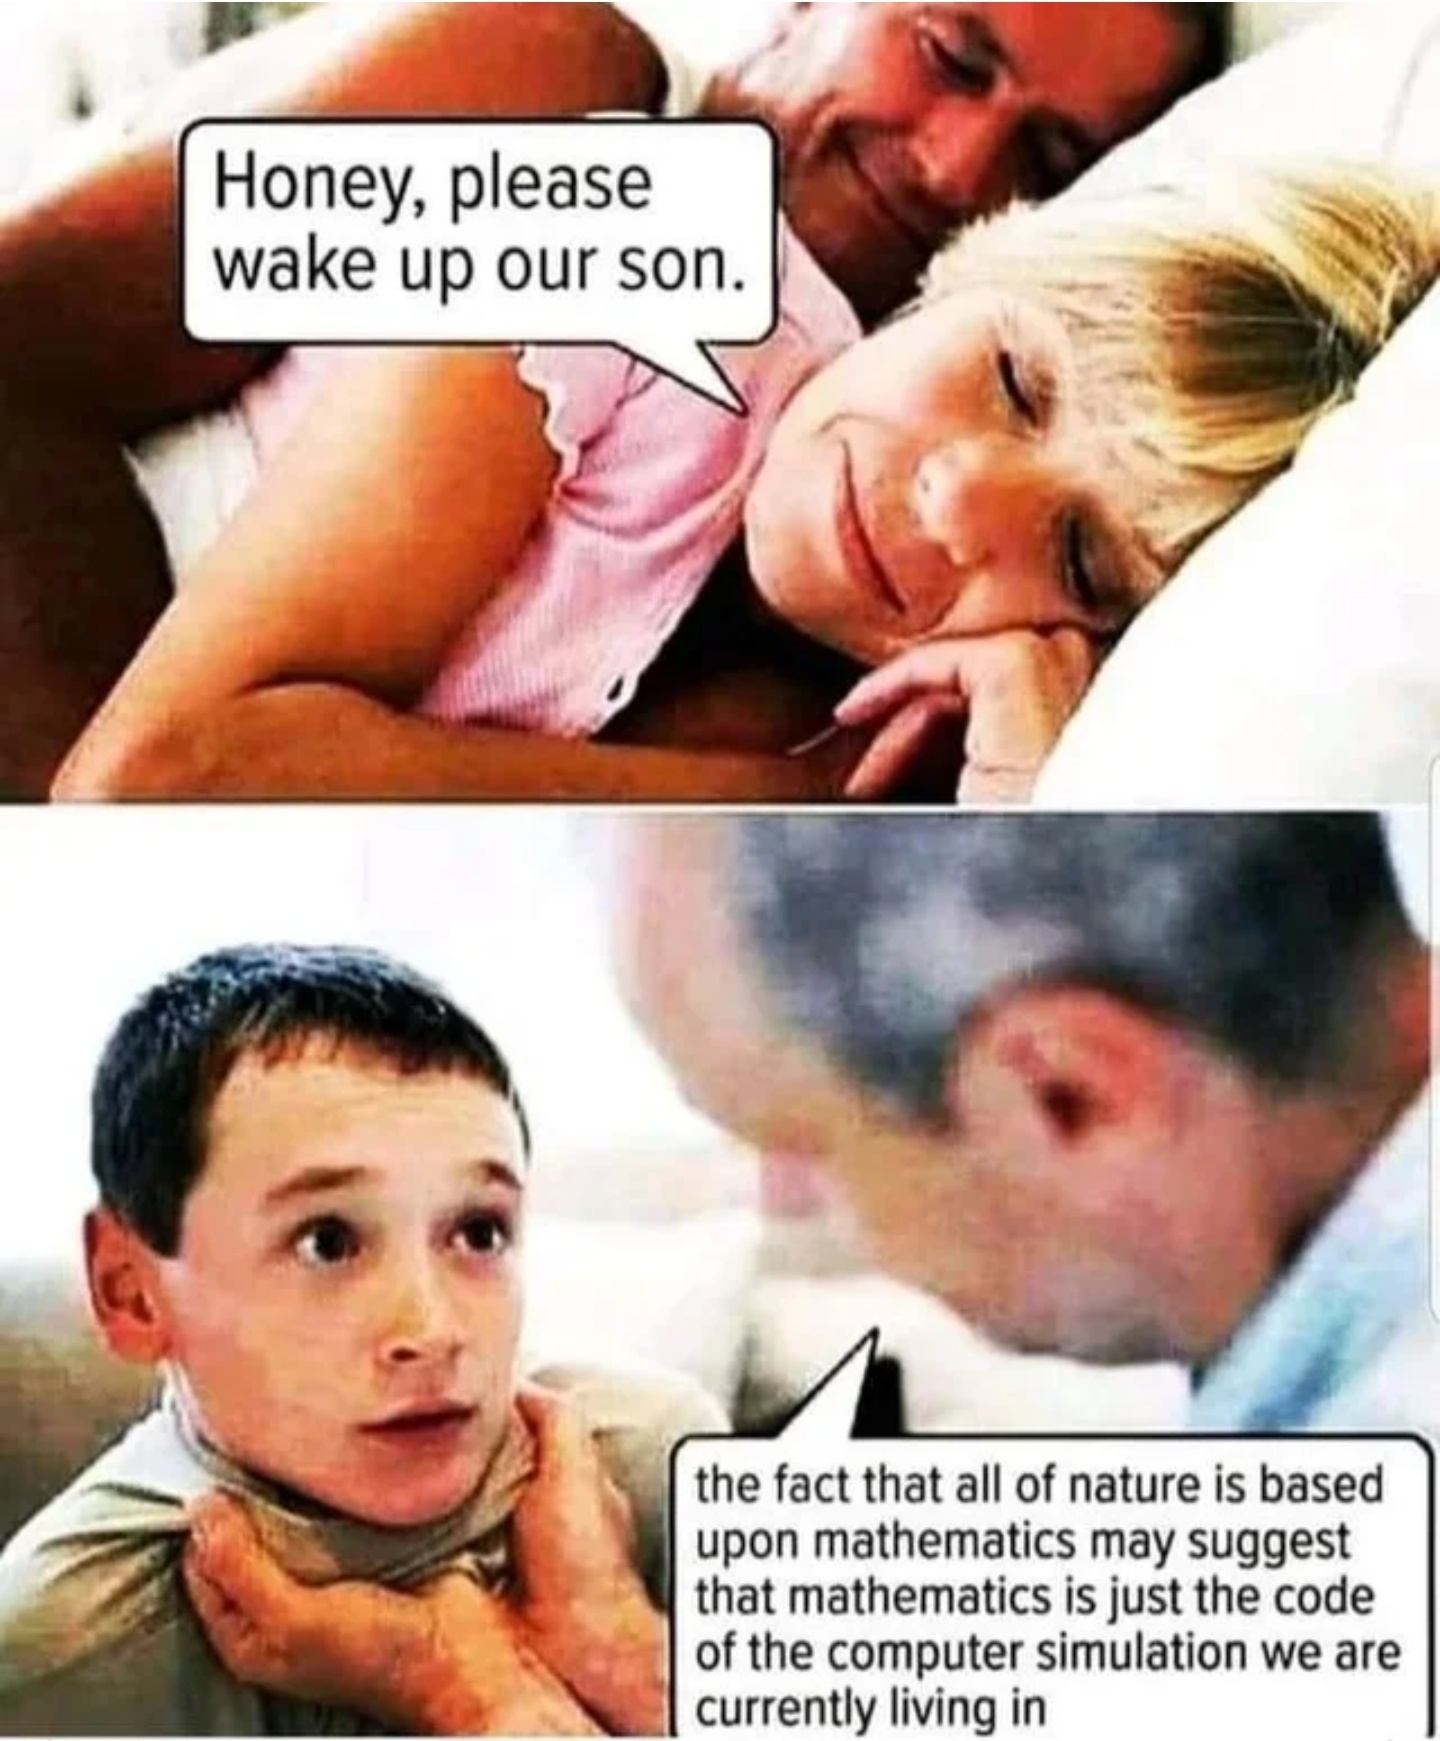 meme stream - honey please wake up our son meme - Honey, please wake up our son. the fact that all of nature is based upon mathematics may suggest that mathematics is just the code of the computer simulation we are currently living in